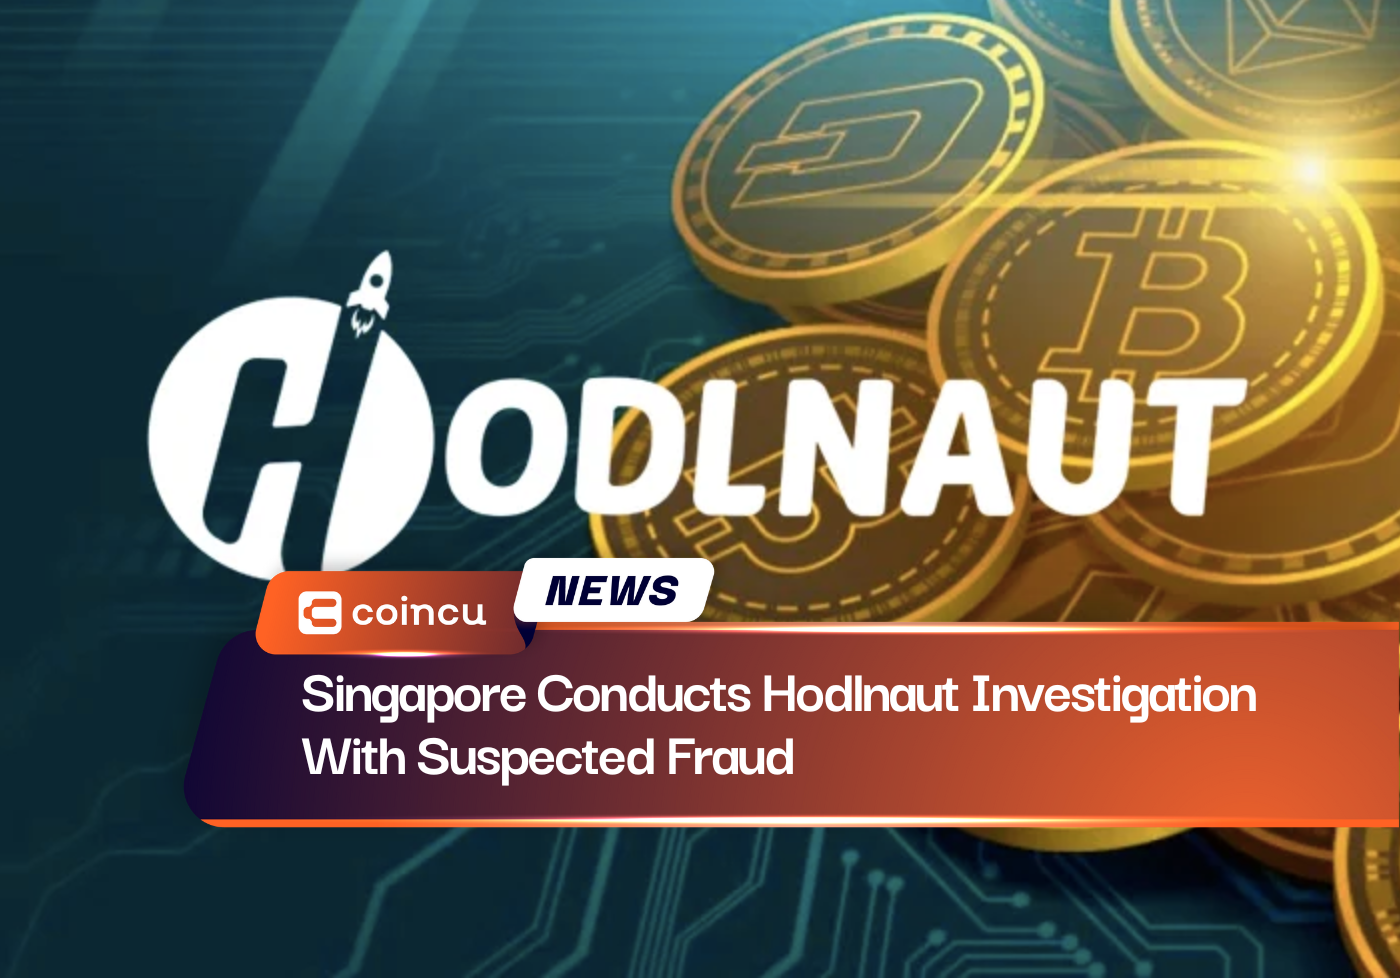 Singapore Conducts Hodlnaut Investigation With Suspected Fraud